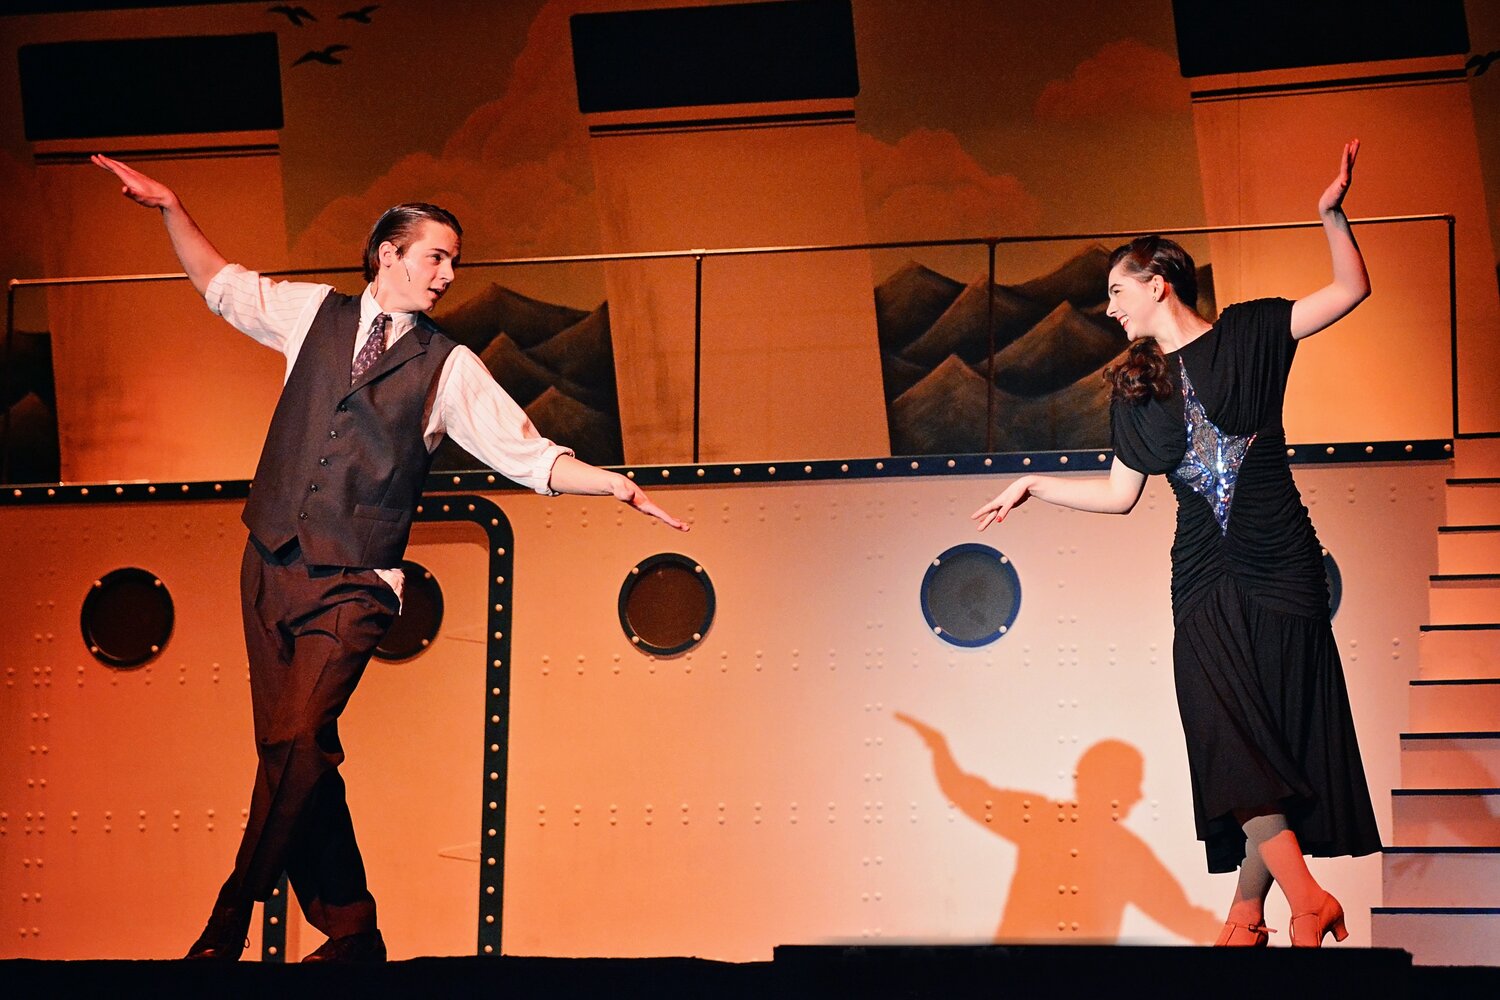 Jackson Manning, left, and Anna Shea Safran appeared together in "Anything Goes" at Central Bucks High School West. Now they are competing for the Jimmys, the annual National High School Musical Theatre Awards presented by the Broadway League Foundation.